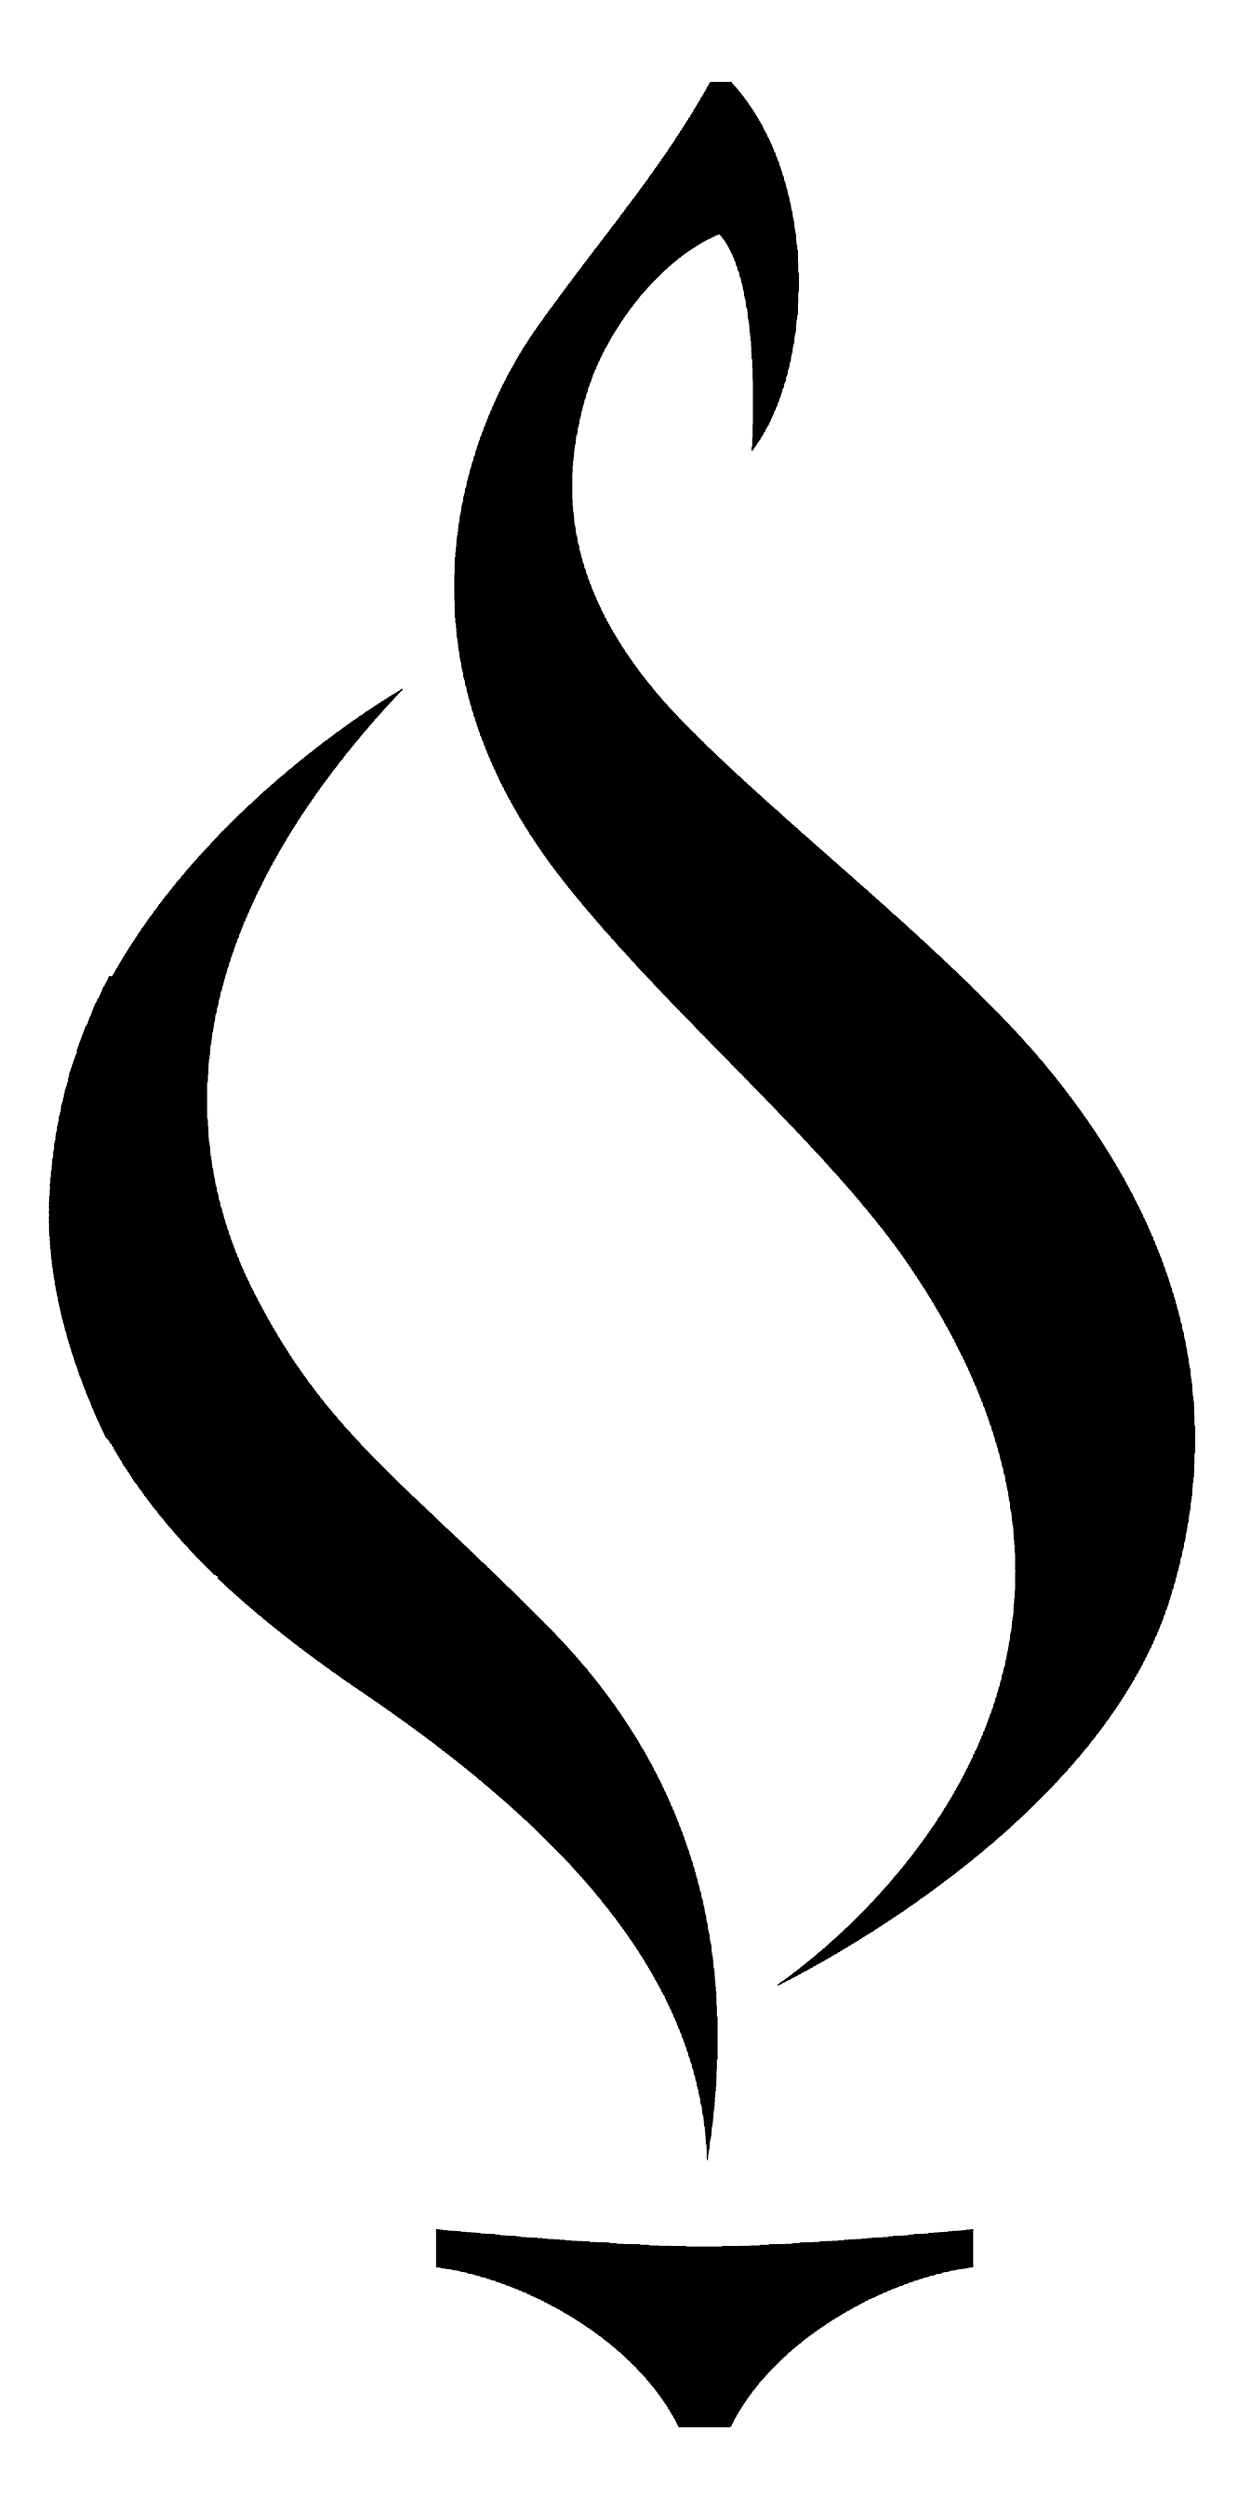 Flames flame clip art picture gallery image 4